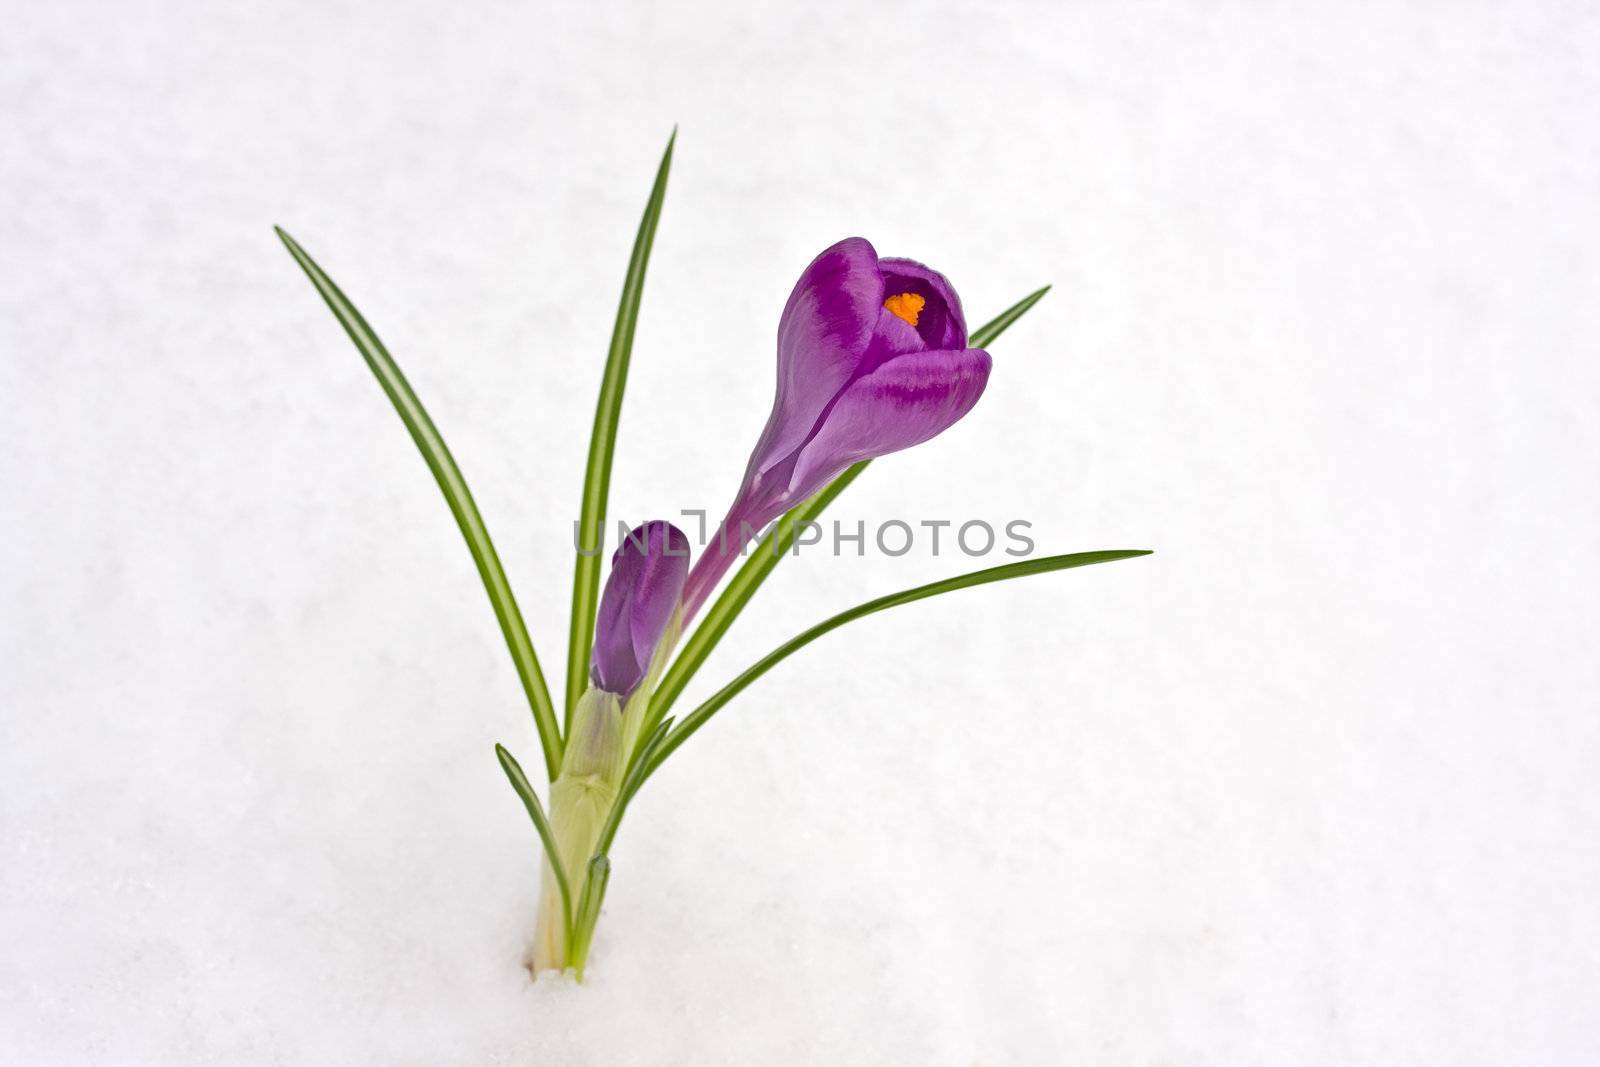 detail of a purple crocus flower in the snow by bernjuer